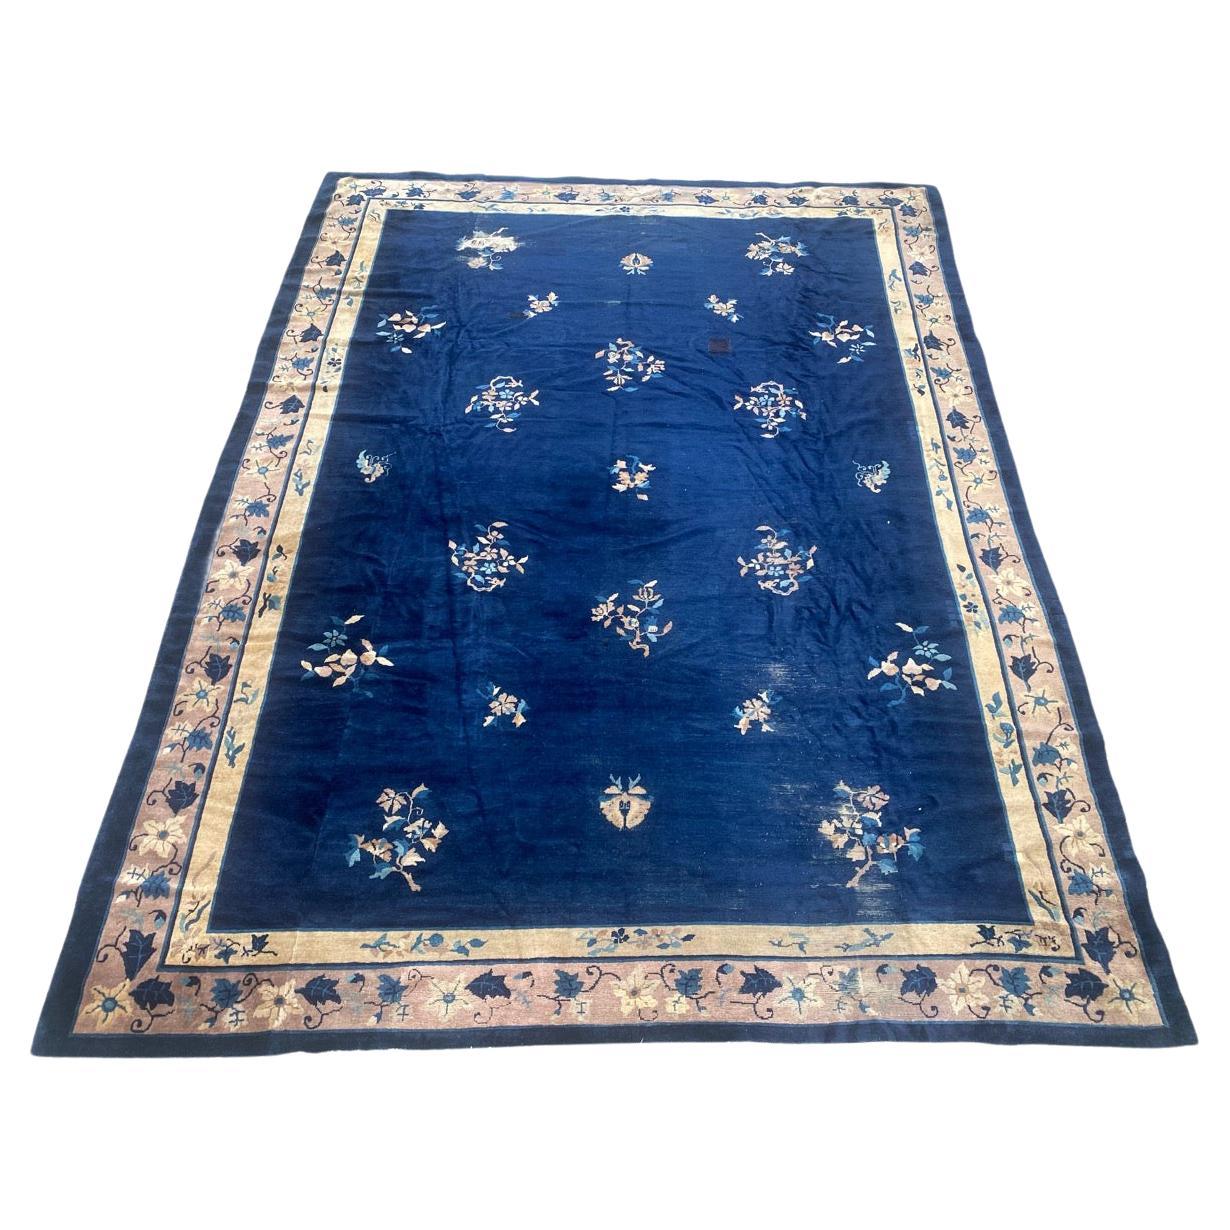 Bobyrug’s Pretty Large Antique Chinese Art Deco Rug